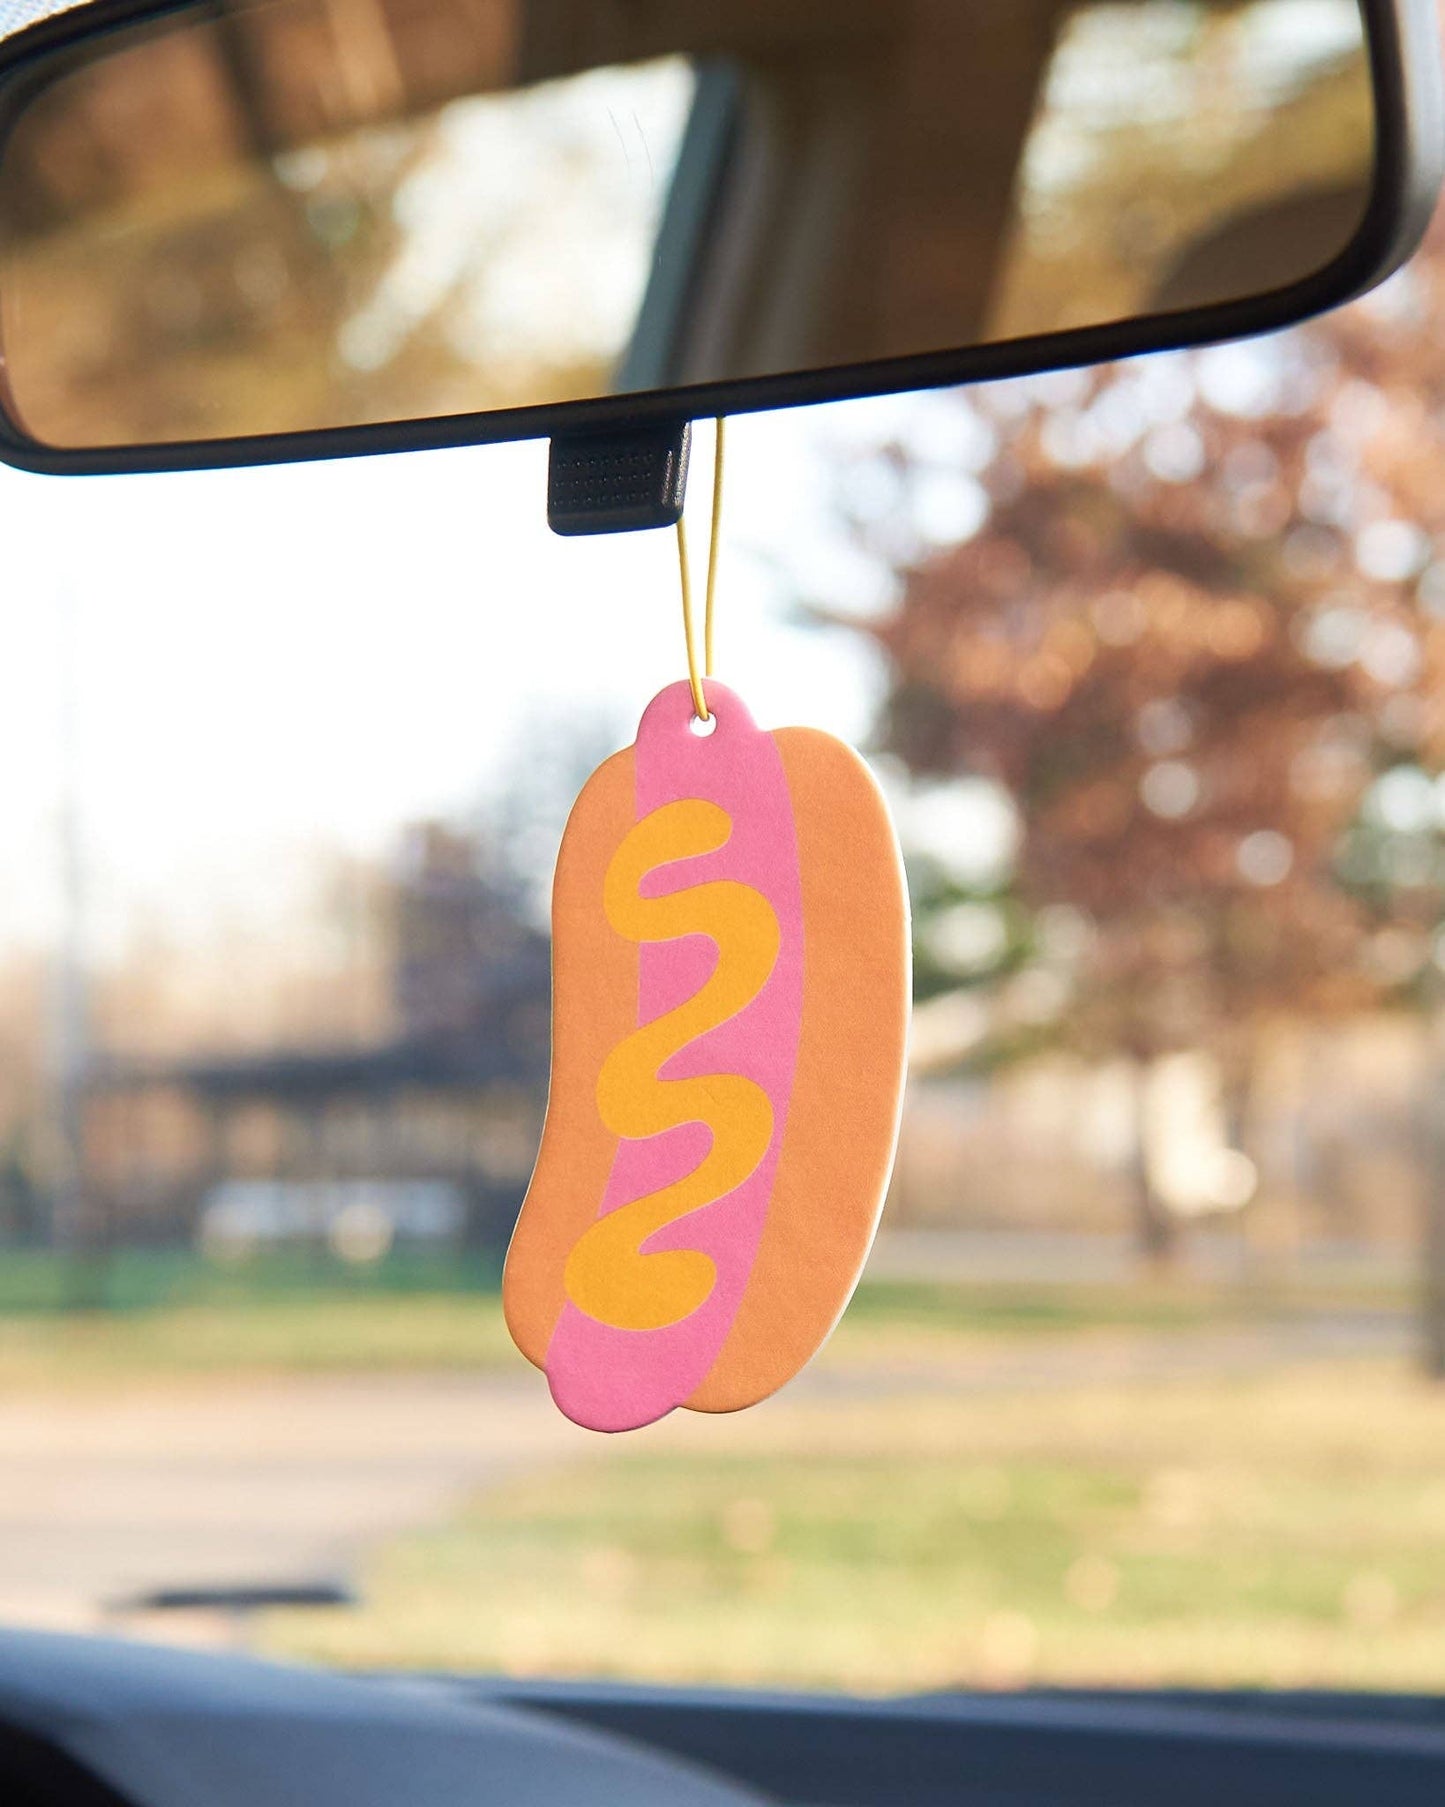 Hot dog shaped air freshener hanging from rear view mirror 